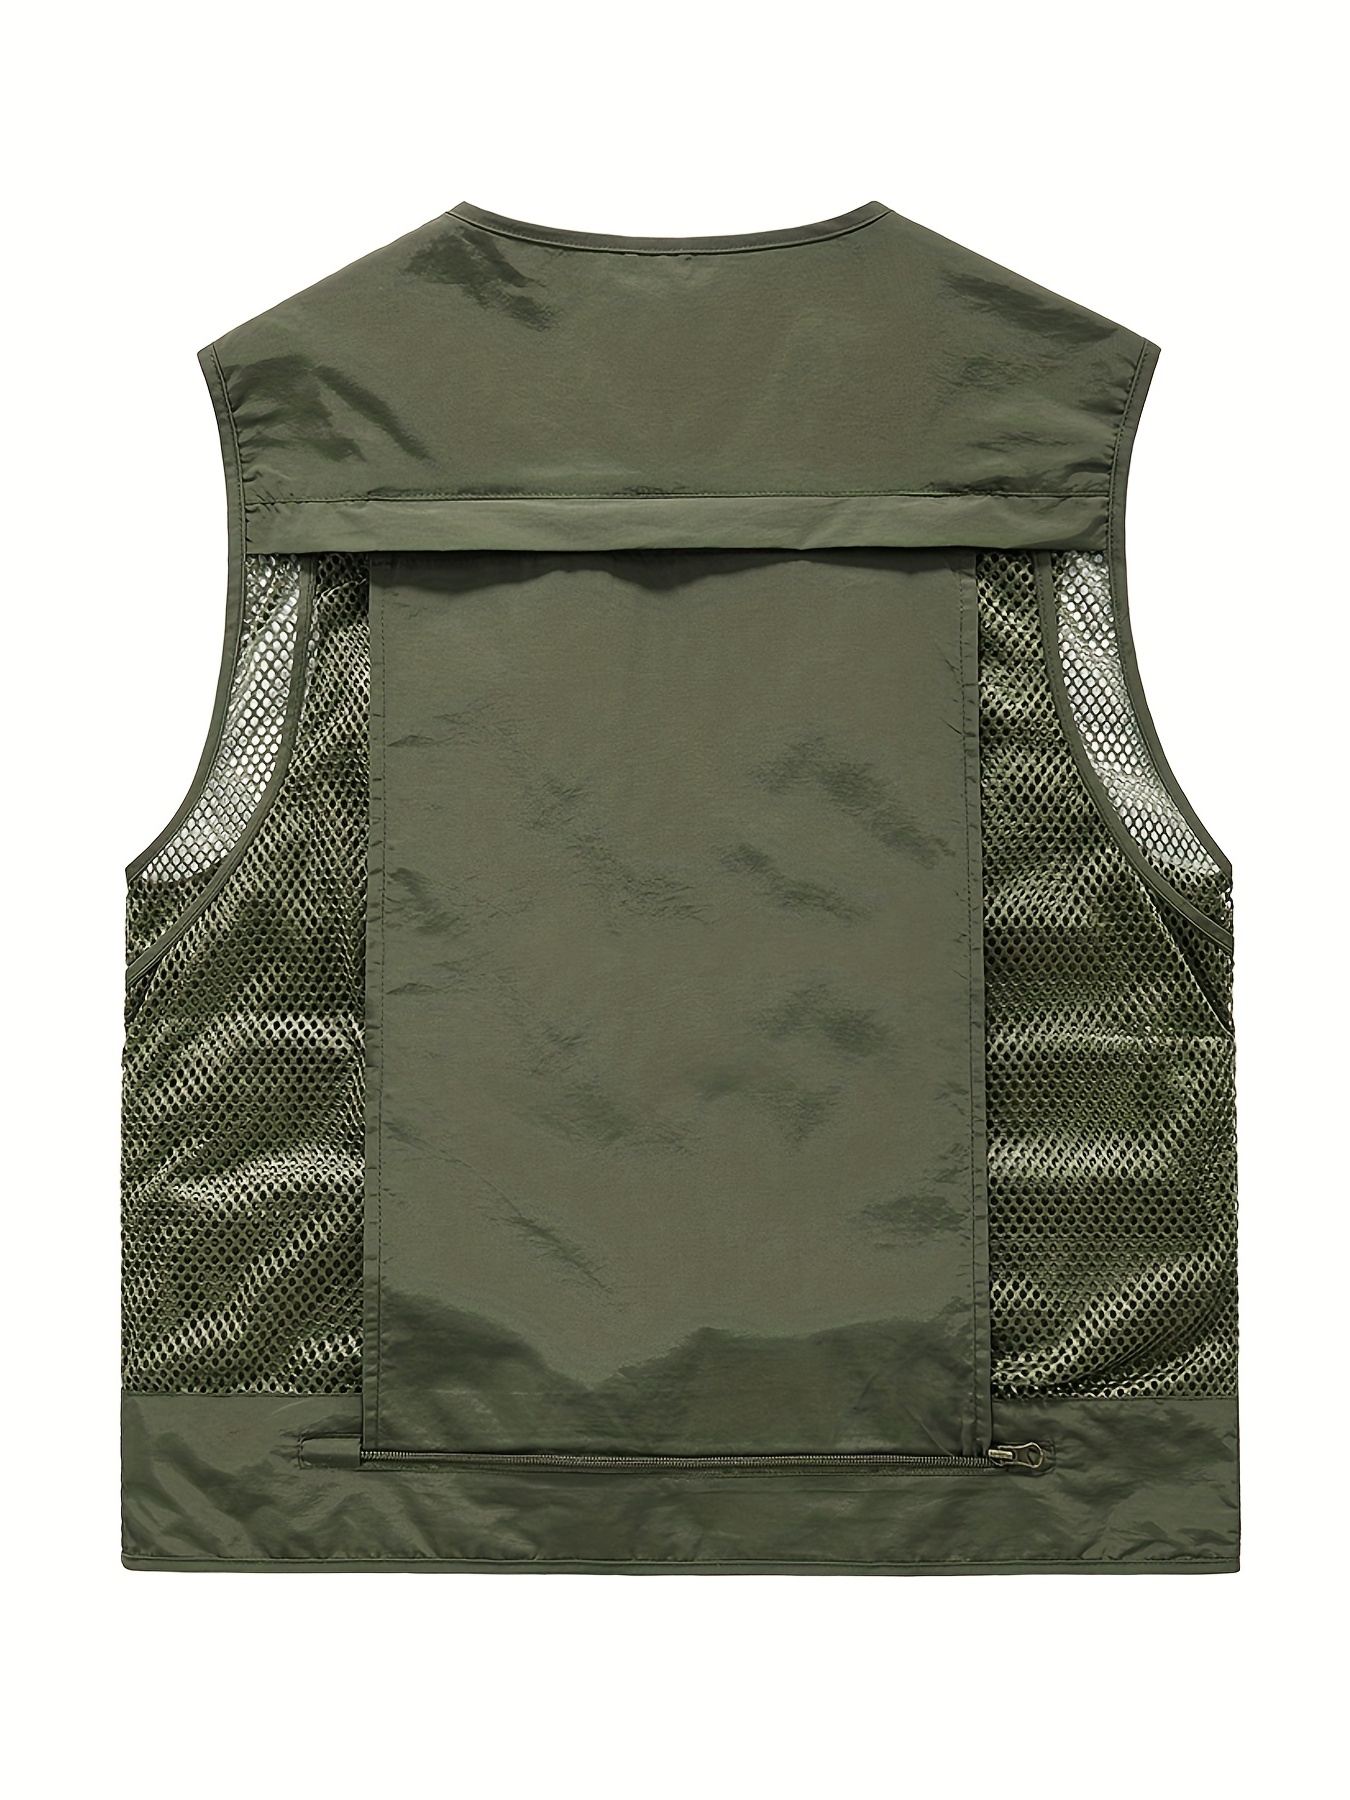 Mens Hooded Mesh Multiple Pockets Traveling Vest Army Green XL